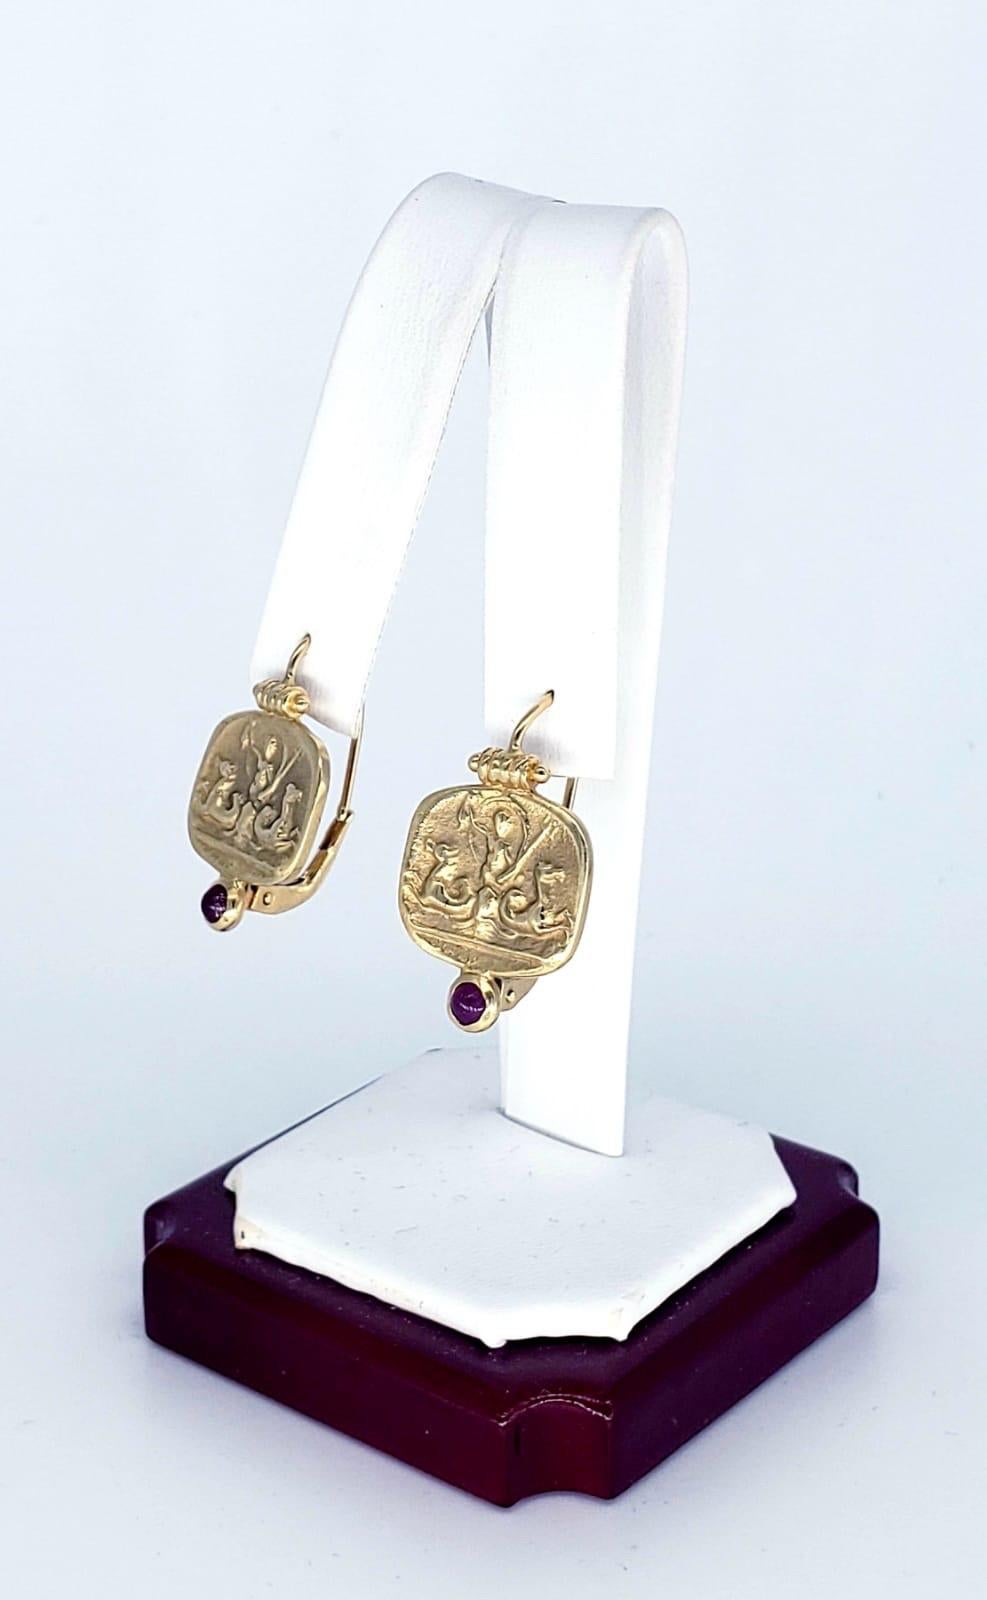 Vintage Neptune Ruby Gemstone Italy Drop Earrings. 

Give your look a real sea change of style with this pair of classically inspired drop earrings! Featuring images of the Roman god, Neptune, these handcrafted 14k yellow gold drops are an ornate